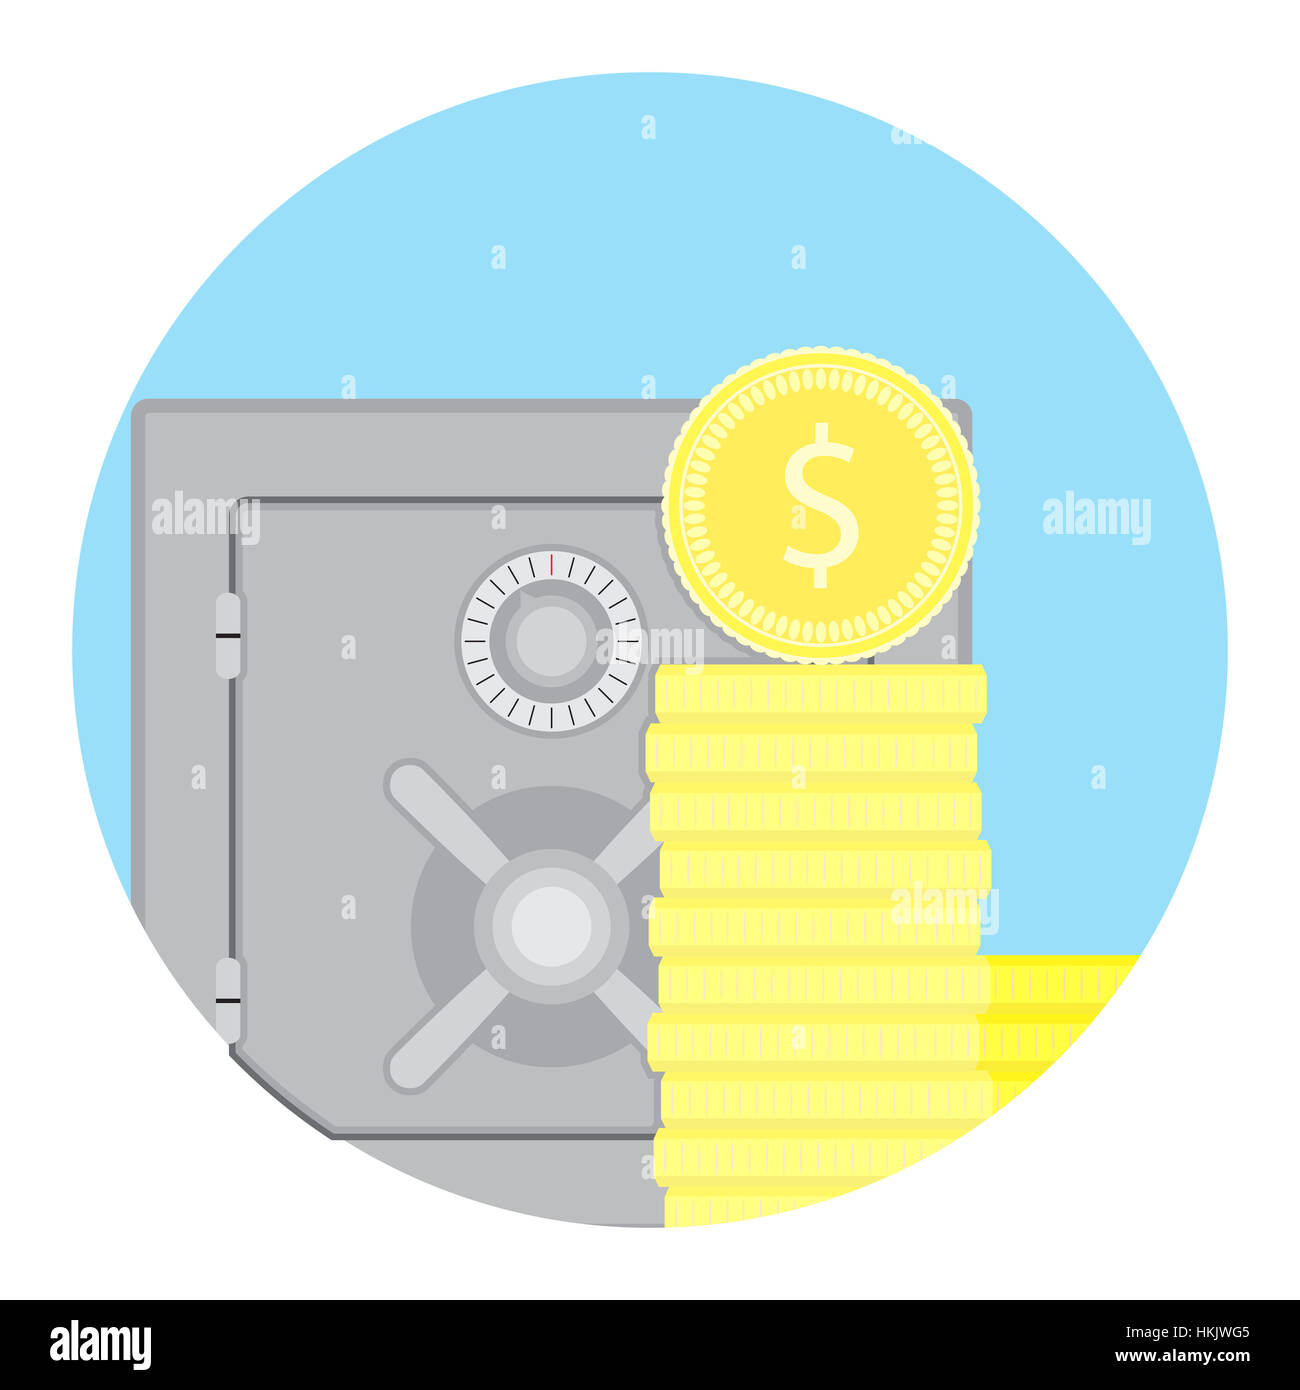 Accrued interest vector icon. Investment finance in safe bank illustration Stock Photo